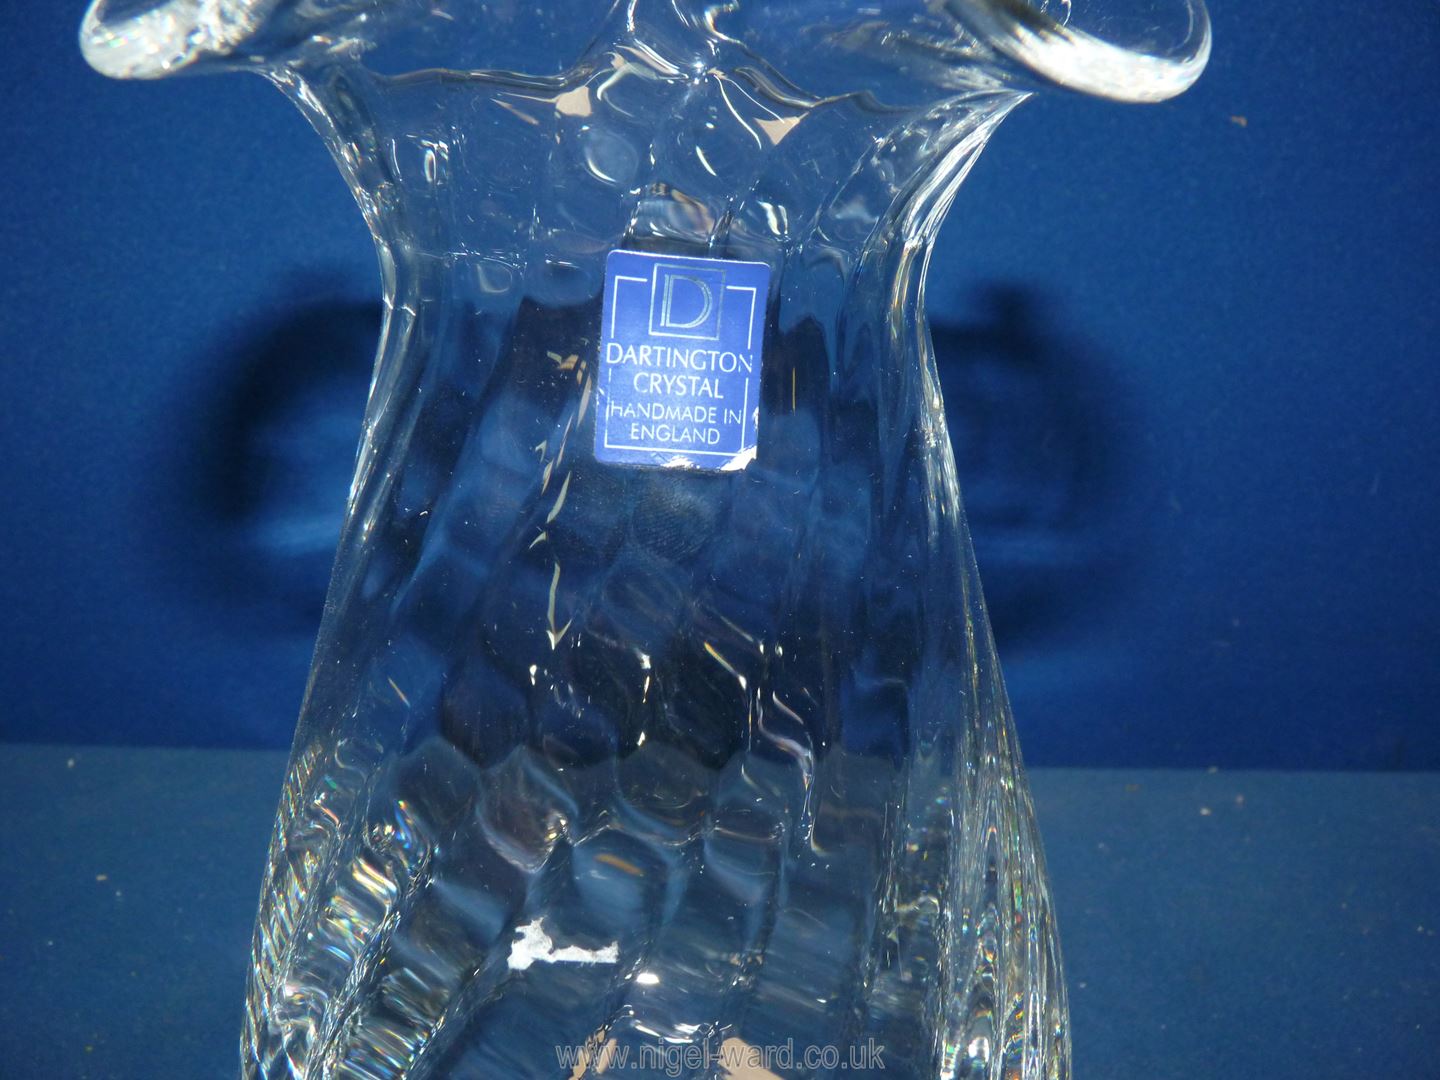 A heavy Dartington swirled crystal glass vase with wavy rim and label. - Image 2 of 2